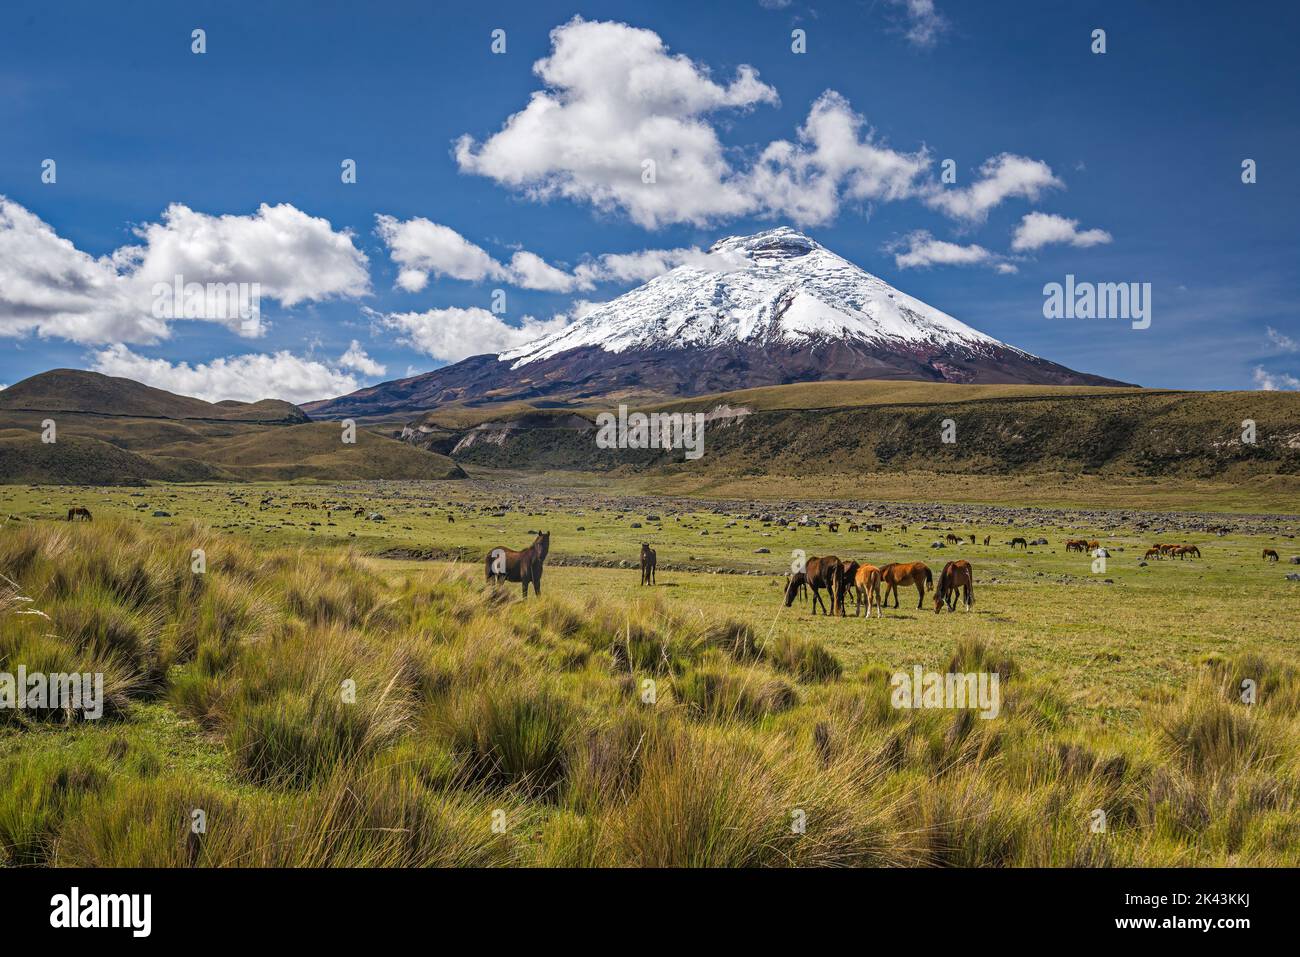 Wide shot of a herd of wild horses grazing on the plain at the foot of the Cotopaxi volcano. In the Cotopaxi protected area, wild horses can be found Stock Photo